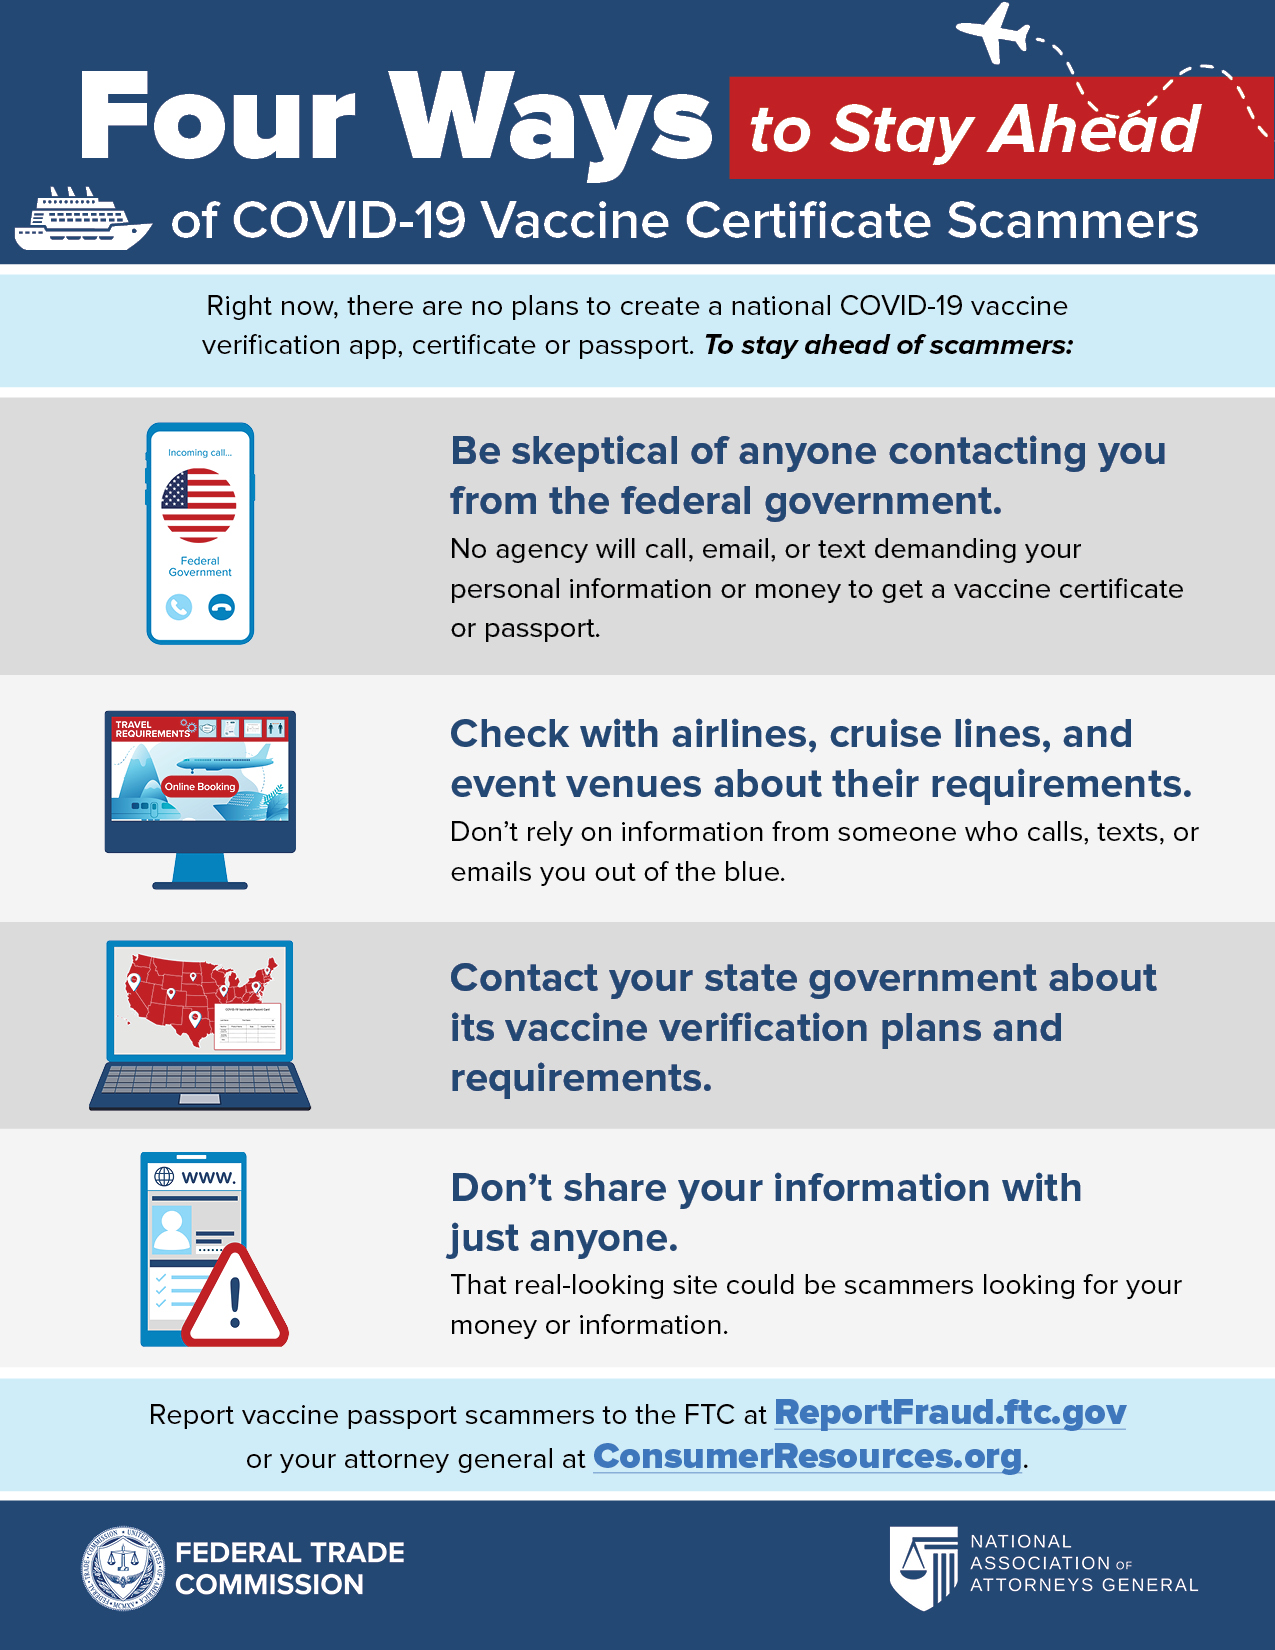 Coronavirus Advice for Consumers | Federal Trade Commission